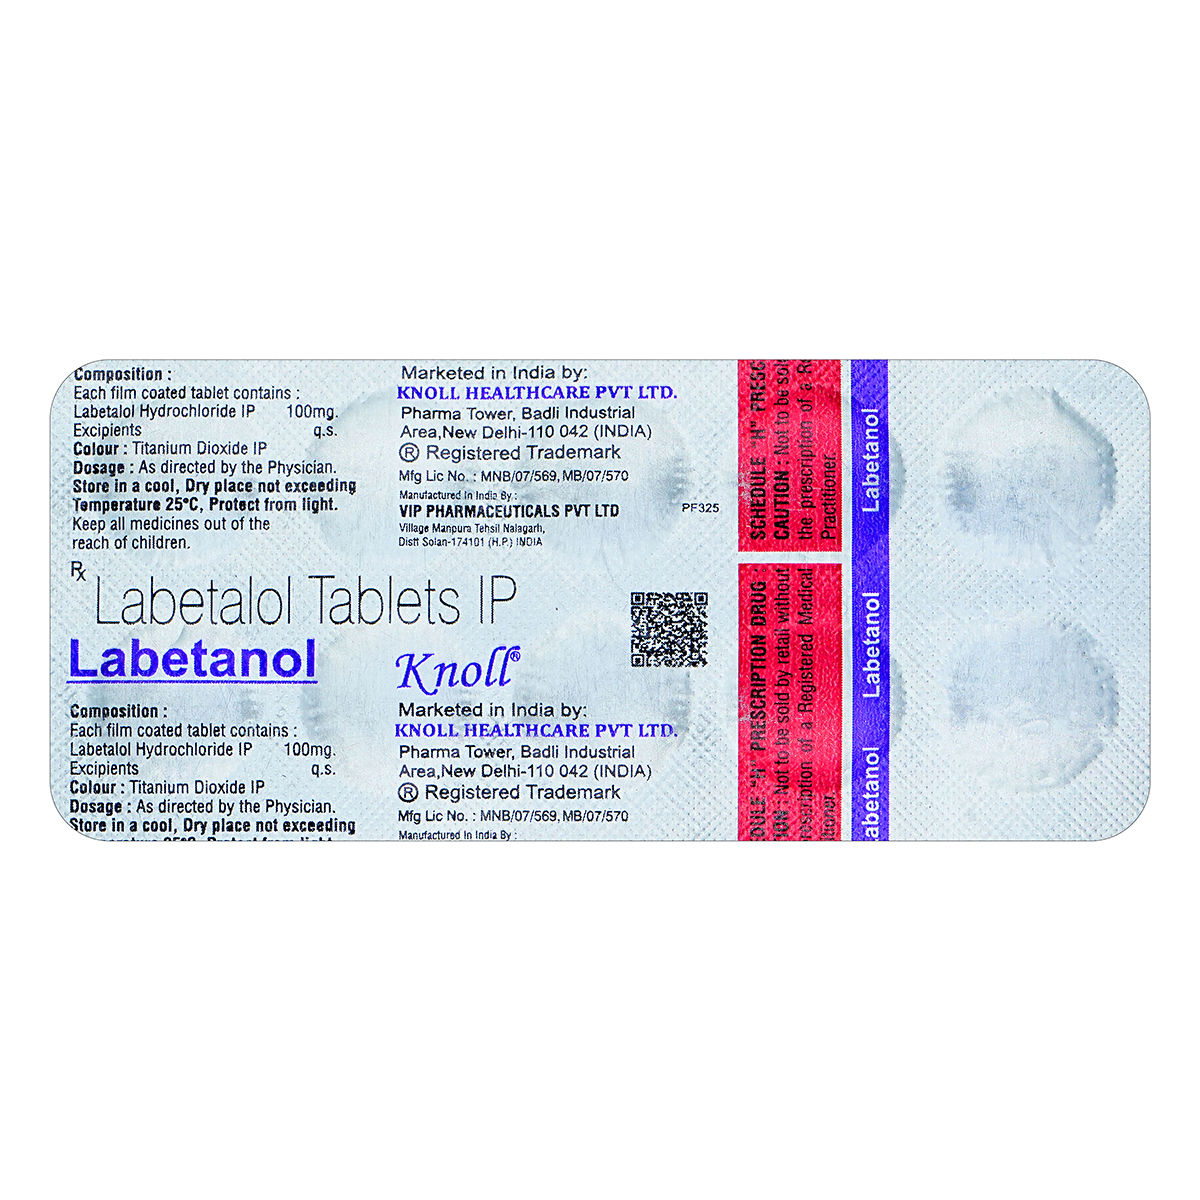 Labebet 100 MG Tablet - Uses, Dosage, Side Effects, Price, Composition